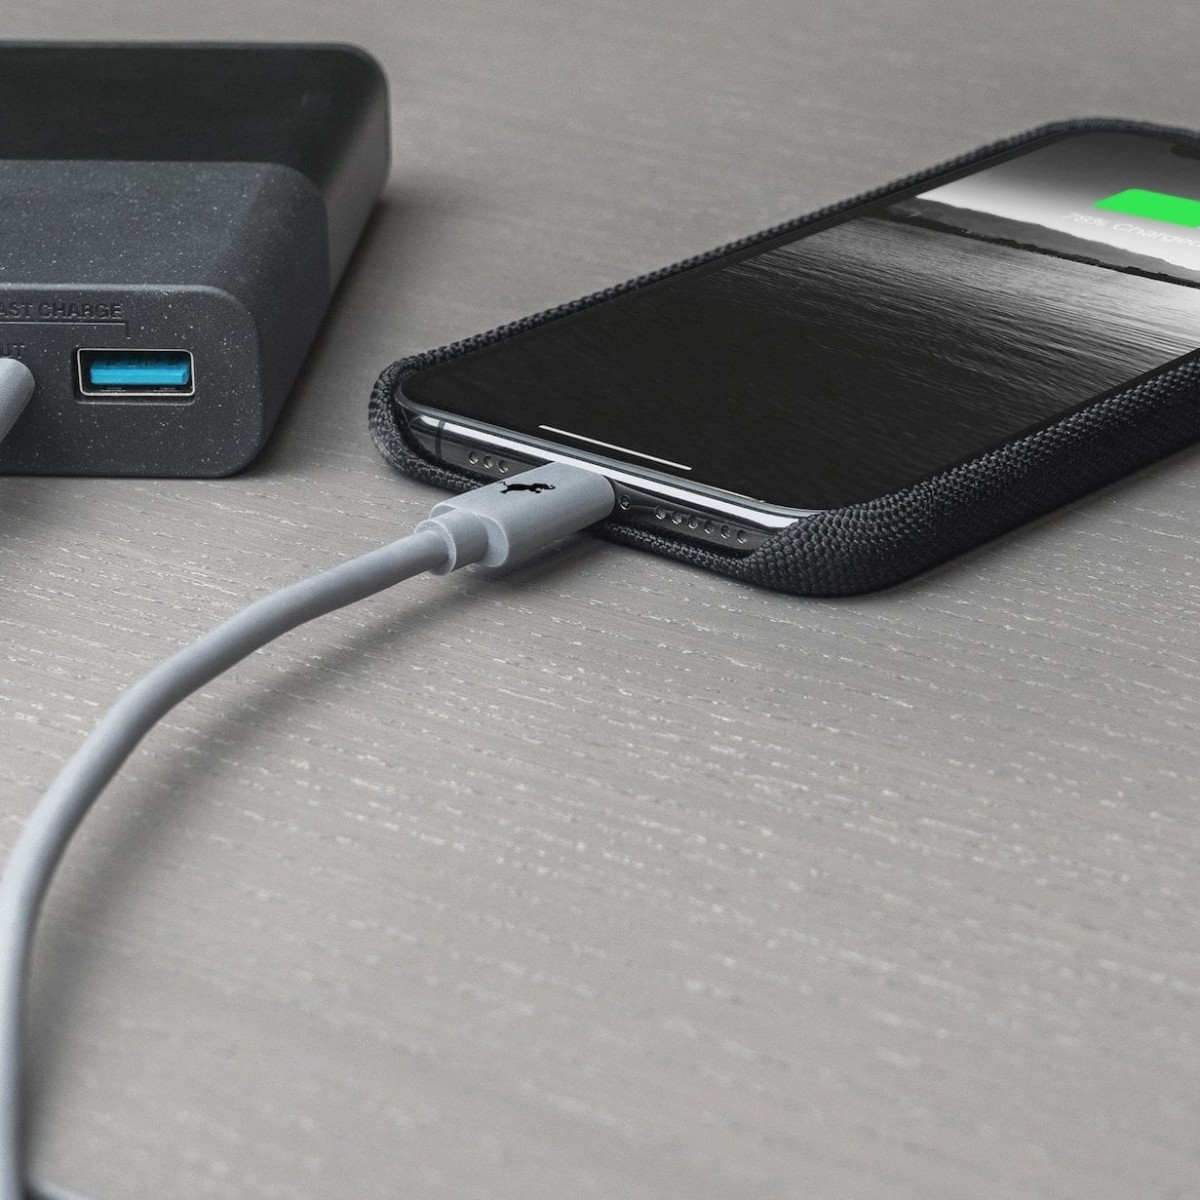 Nimble Premium Fast Charge Upgrade Kit 5-day power bank powers your iPhone anywhere